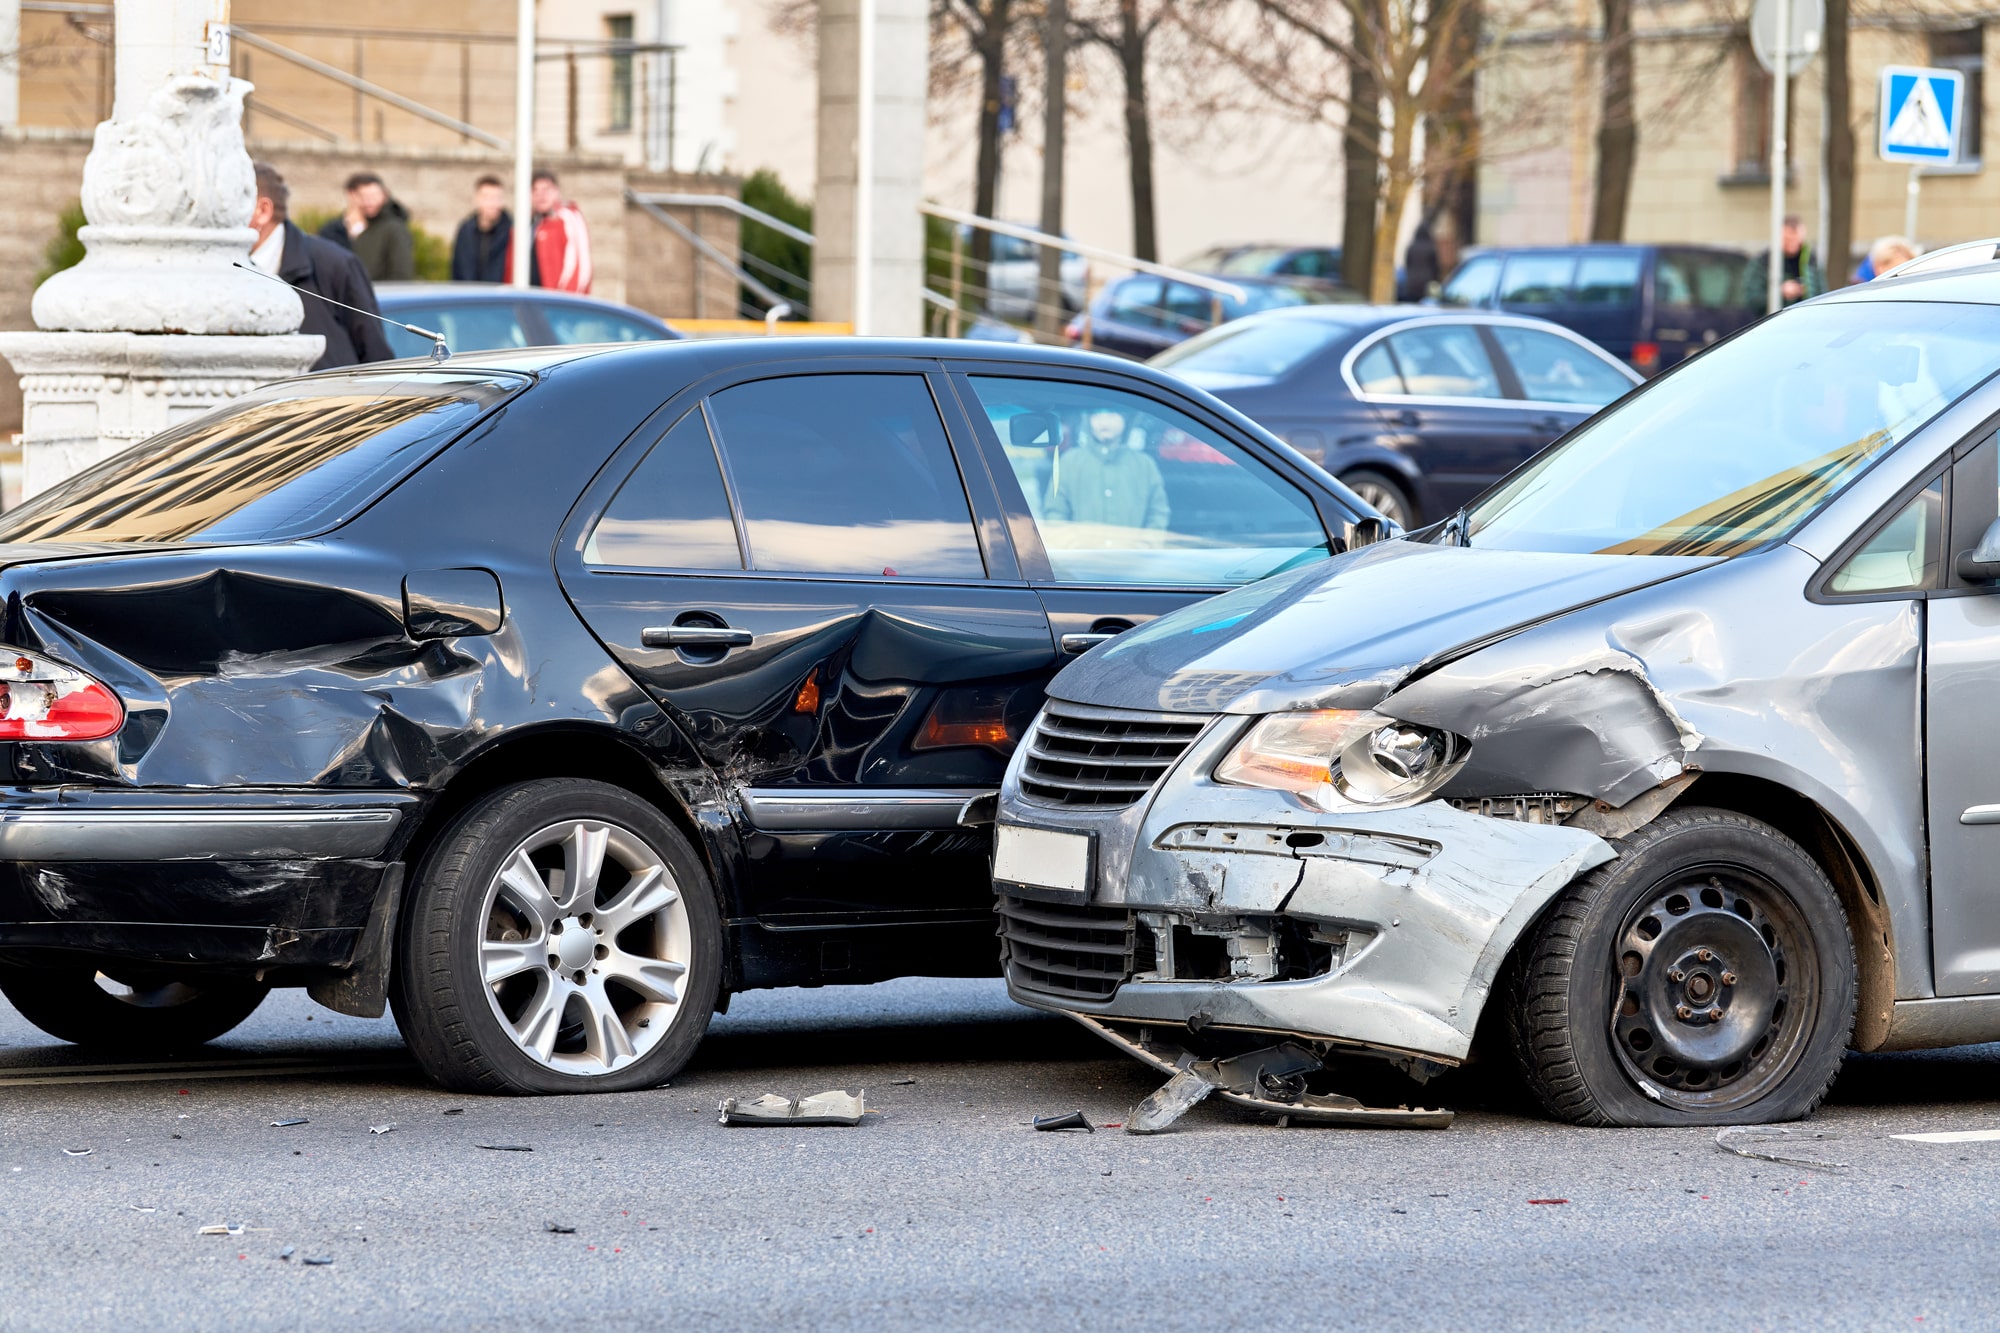 What are your Legal Options if Involved in a Traffic Accident with a Government Vehicle in Maryland?